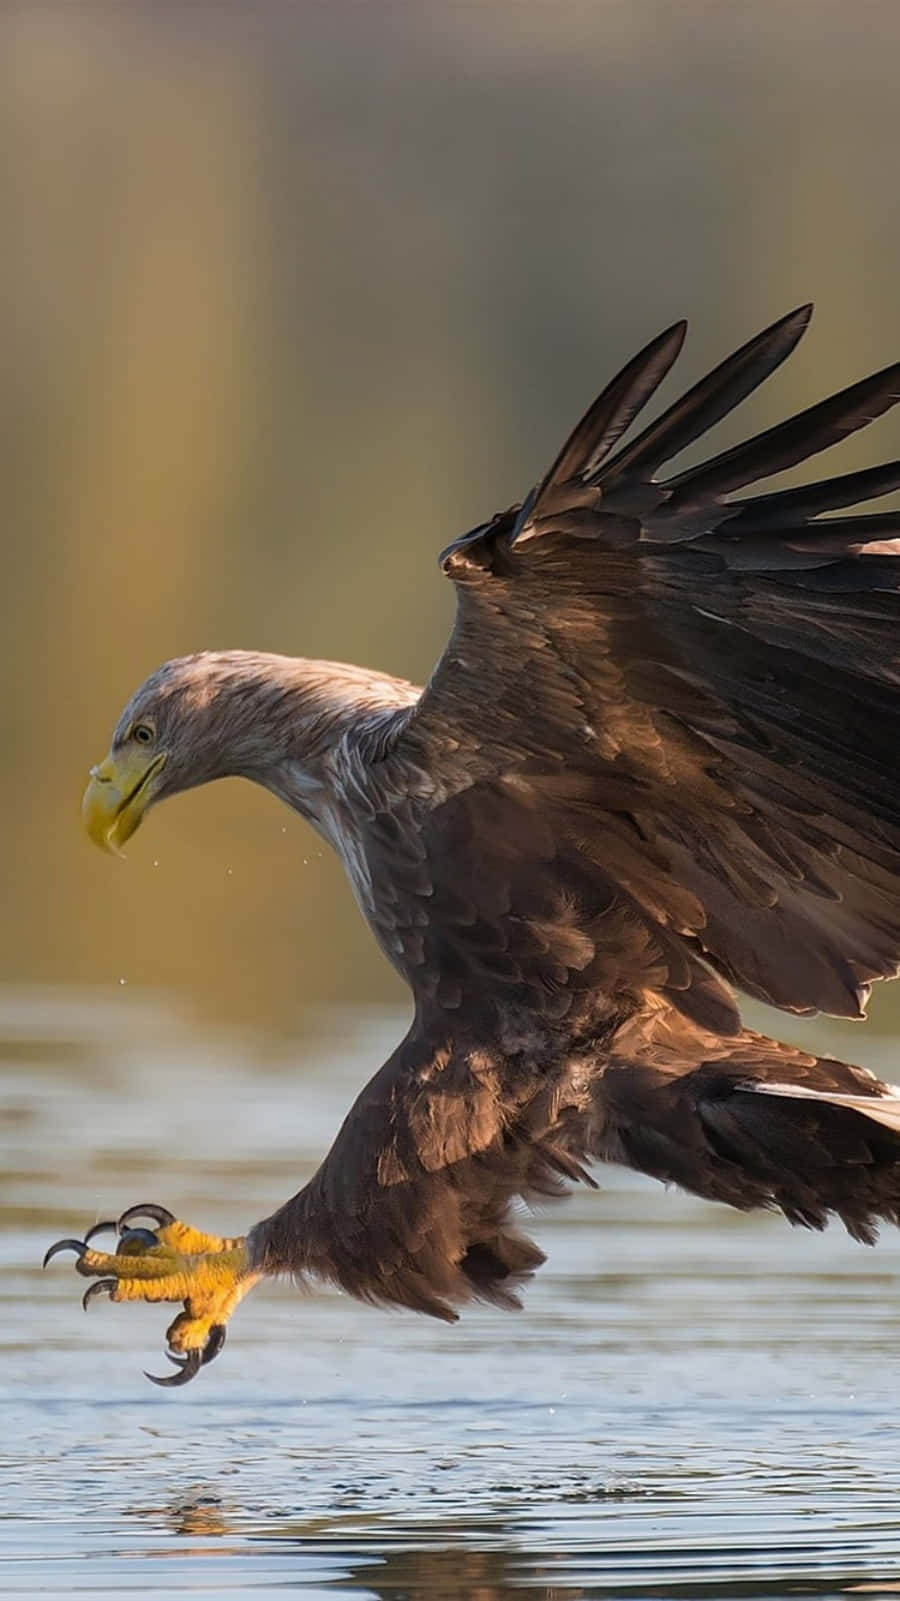 Strike a pose with your Eagle Iphone Wallpaper